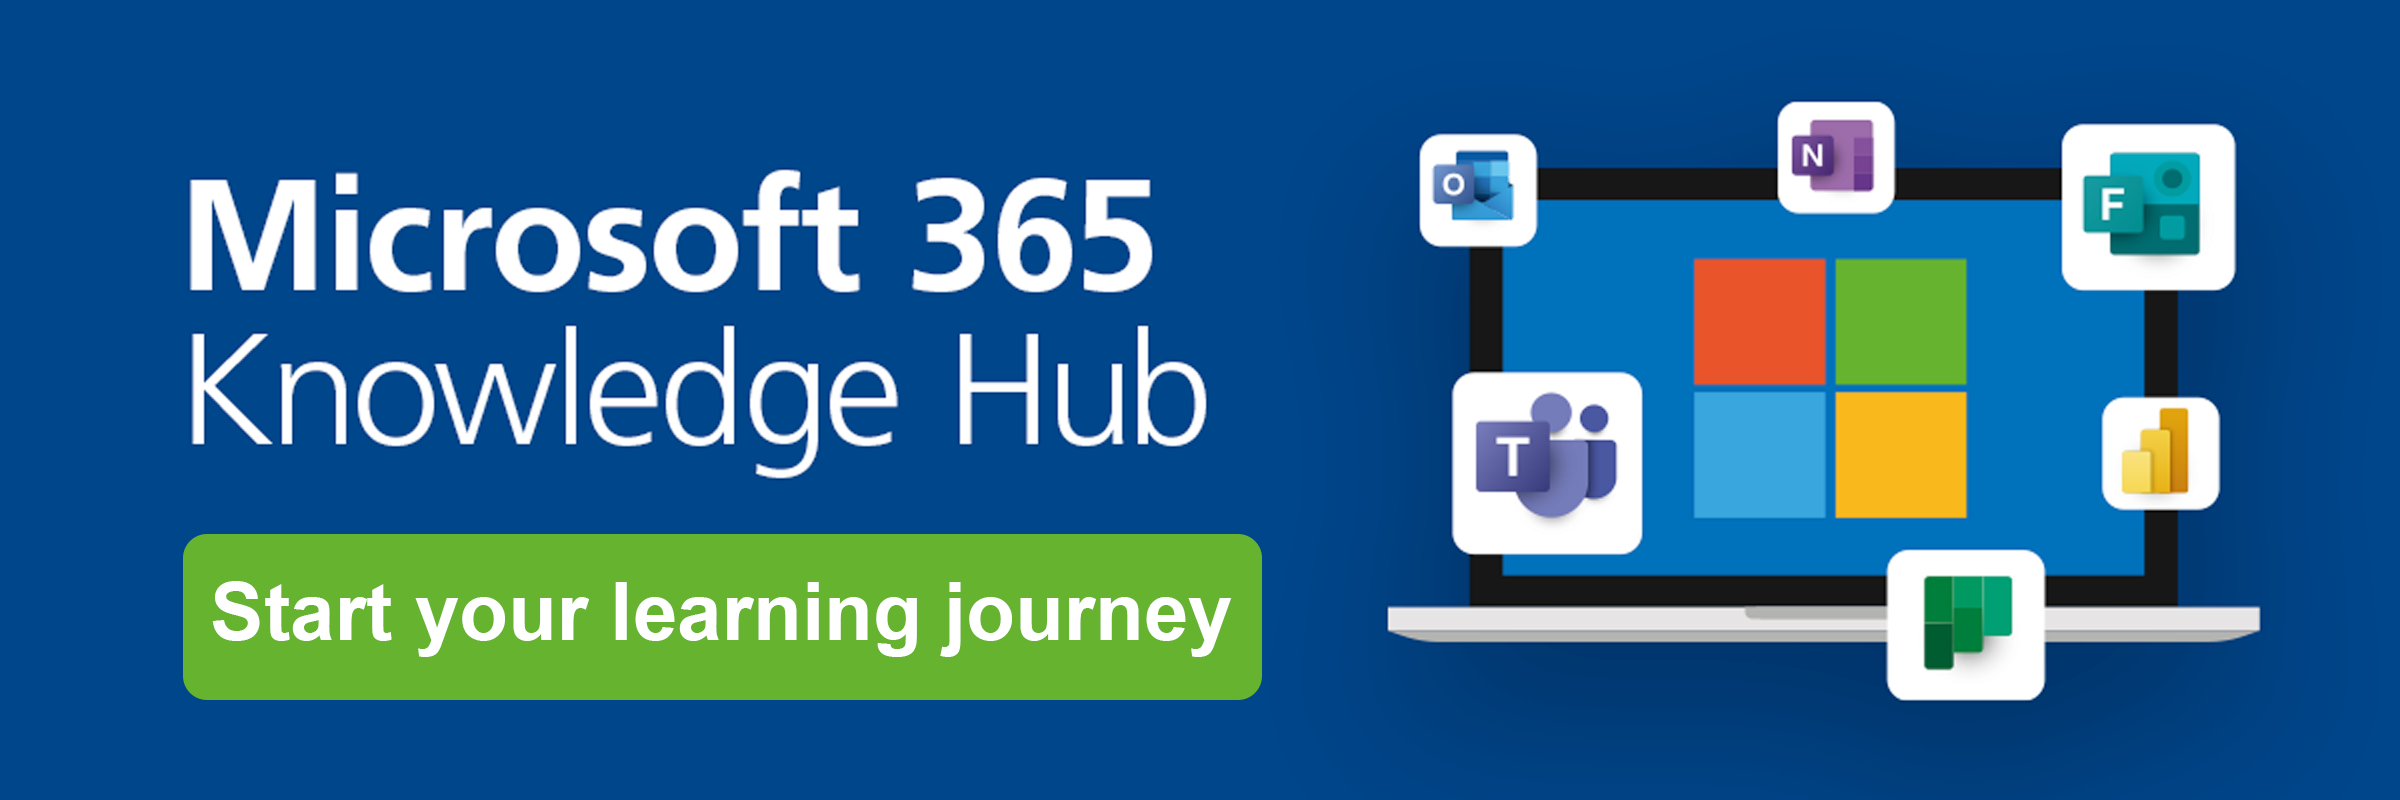 Learn more about the new Microsoft 365 Knowledge Hub